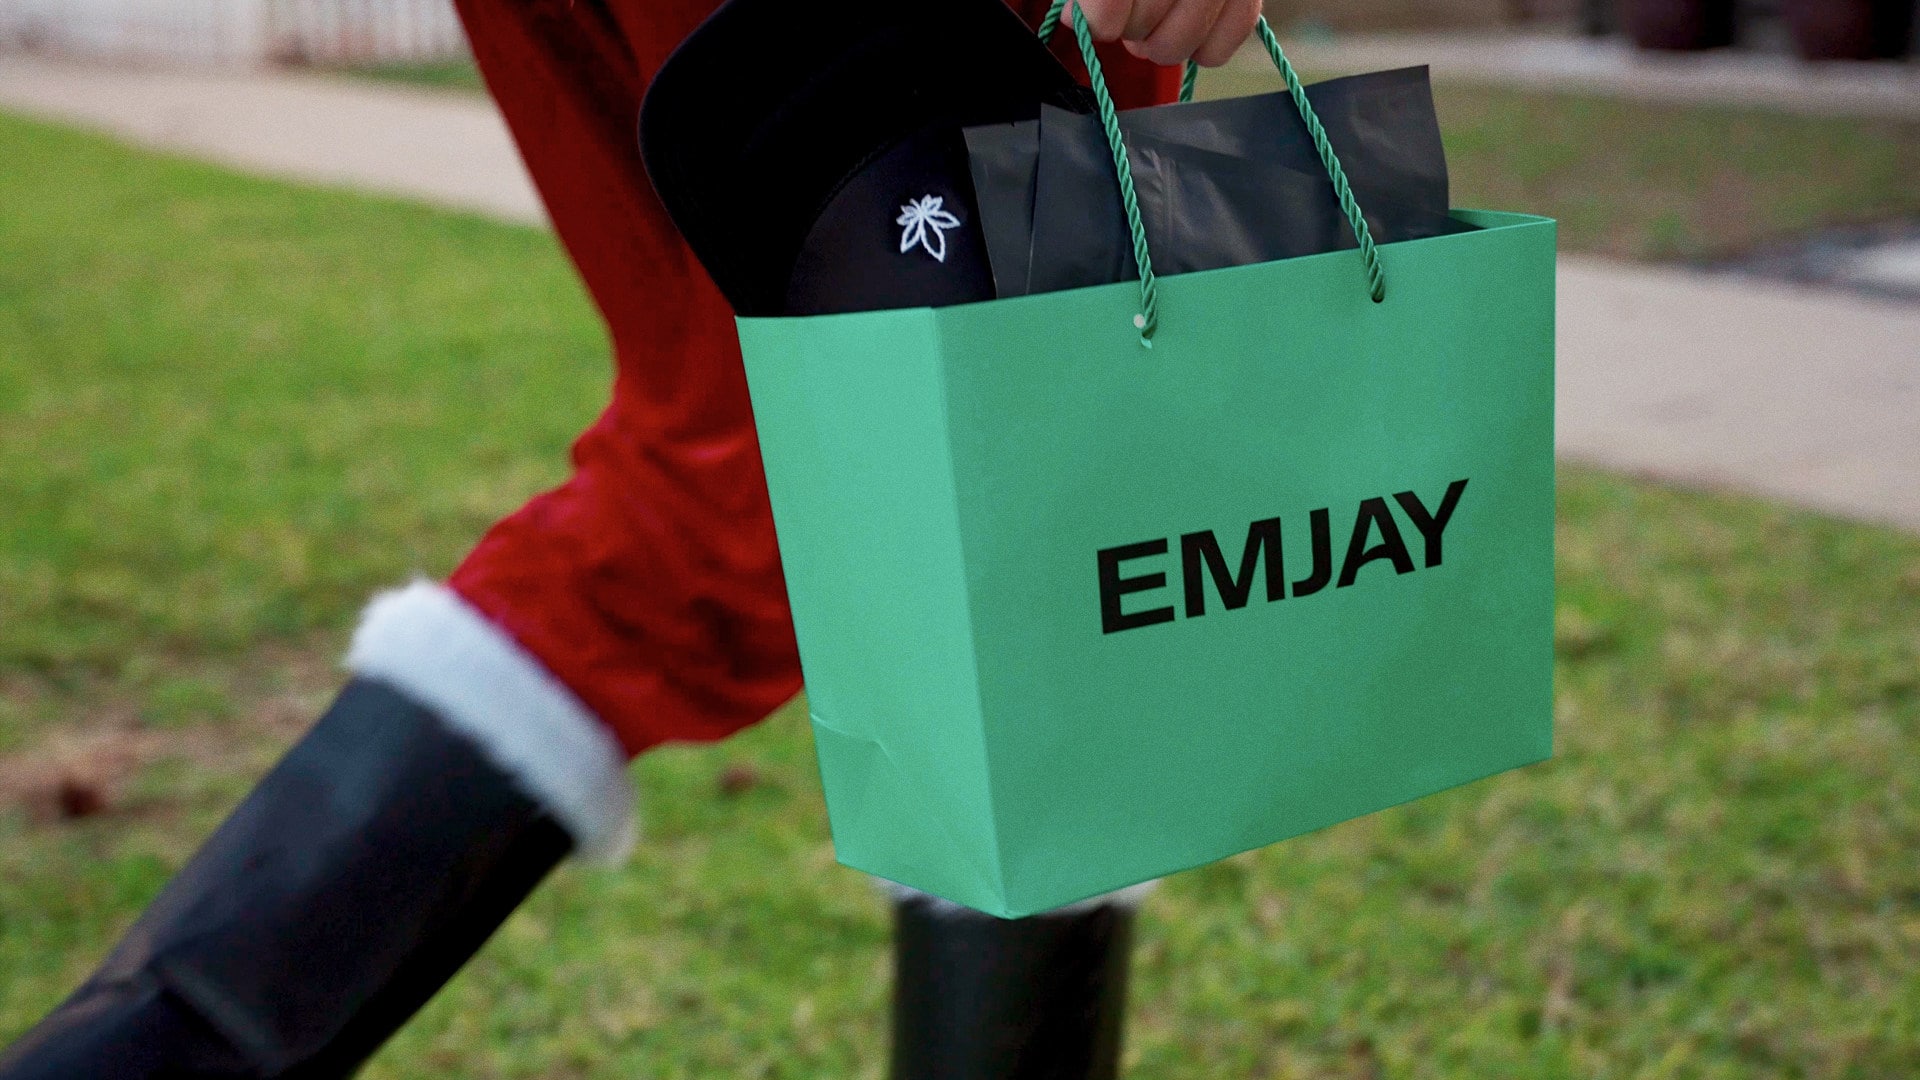 Santa Claus to Deliver Weed, Courtesy of Emjay